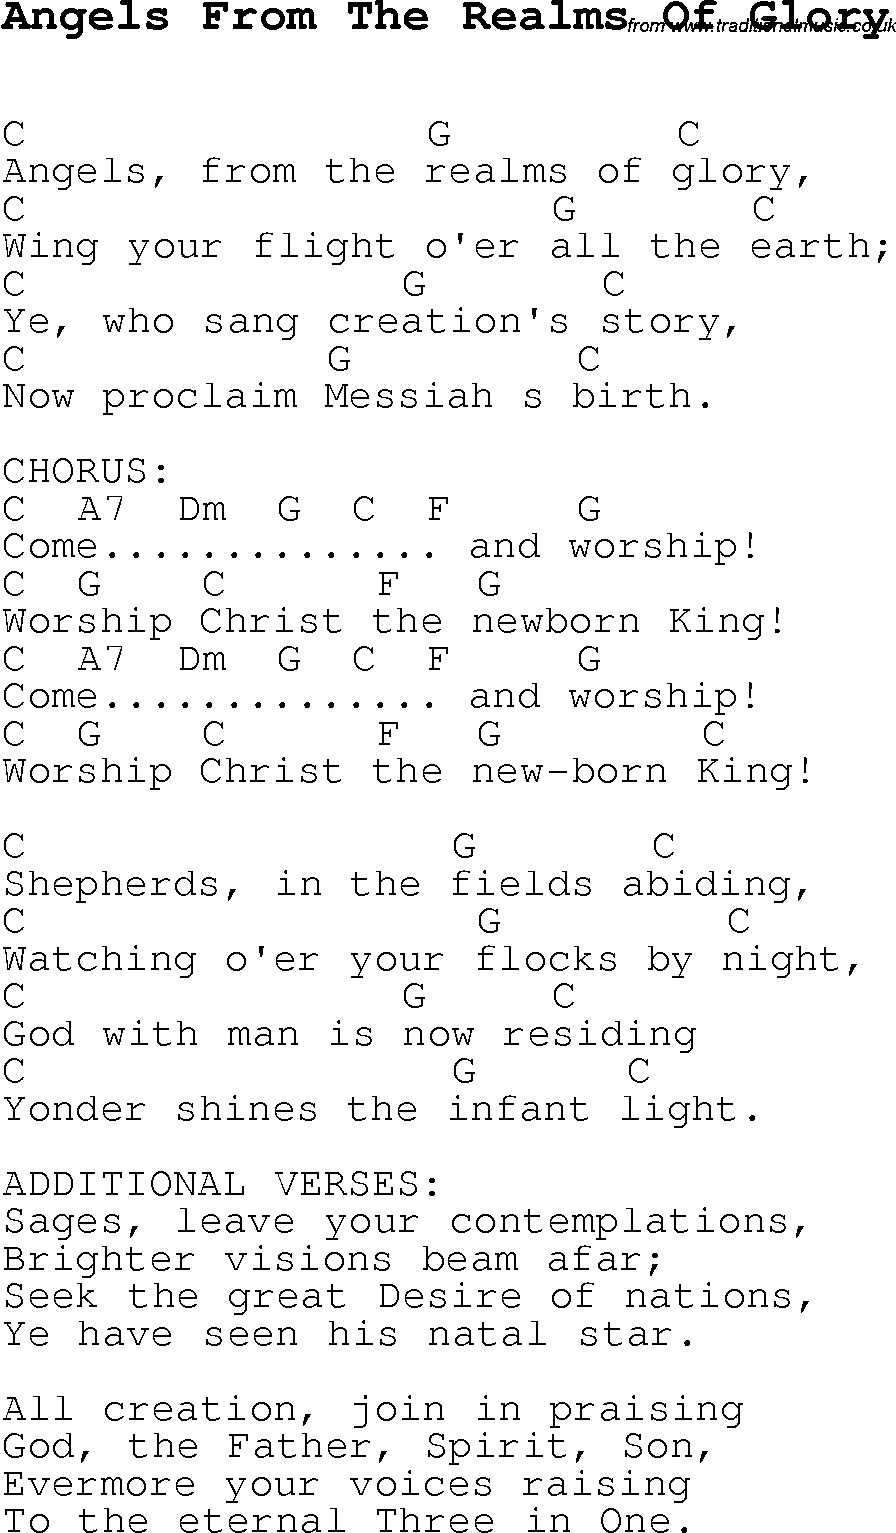 Christmas Carol/Song lyrics with chords for Angels From The Realms Of Glory